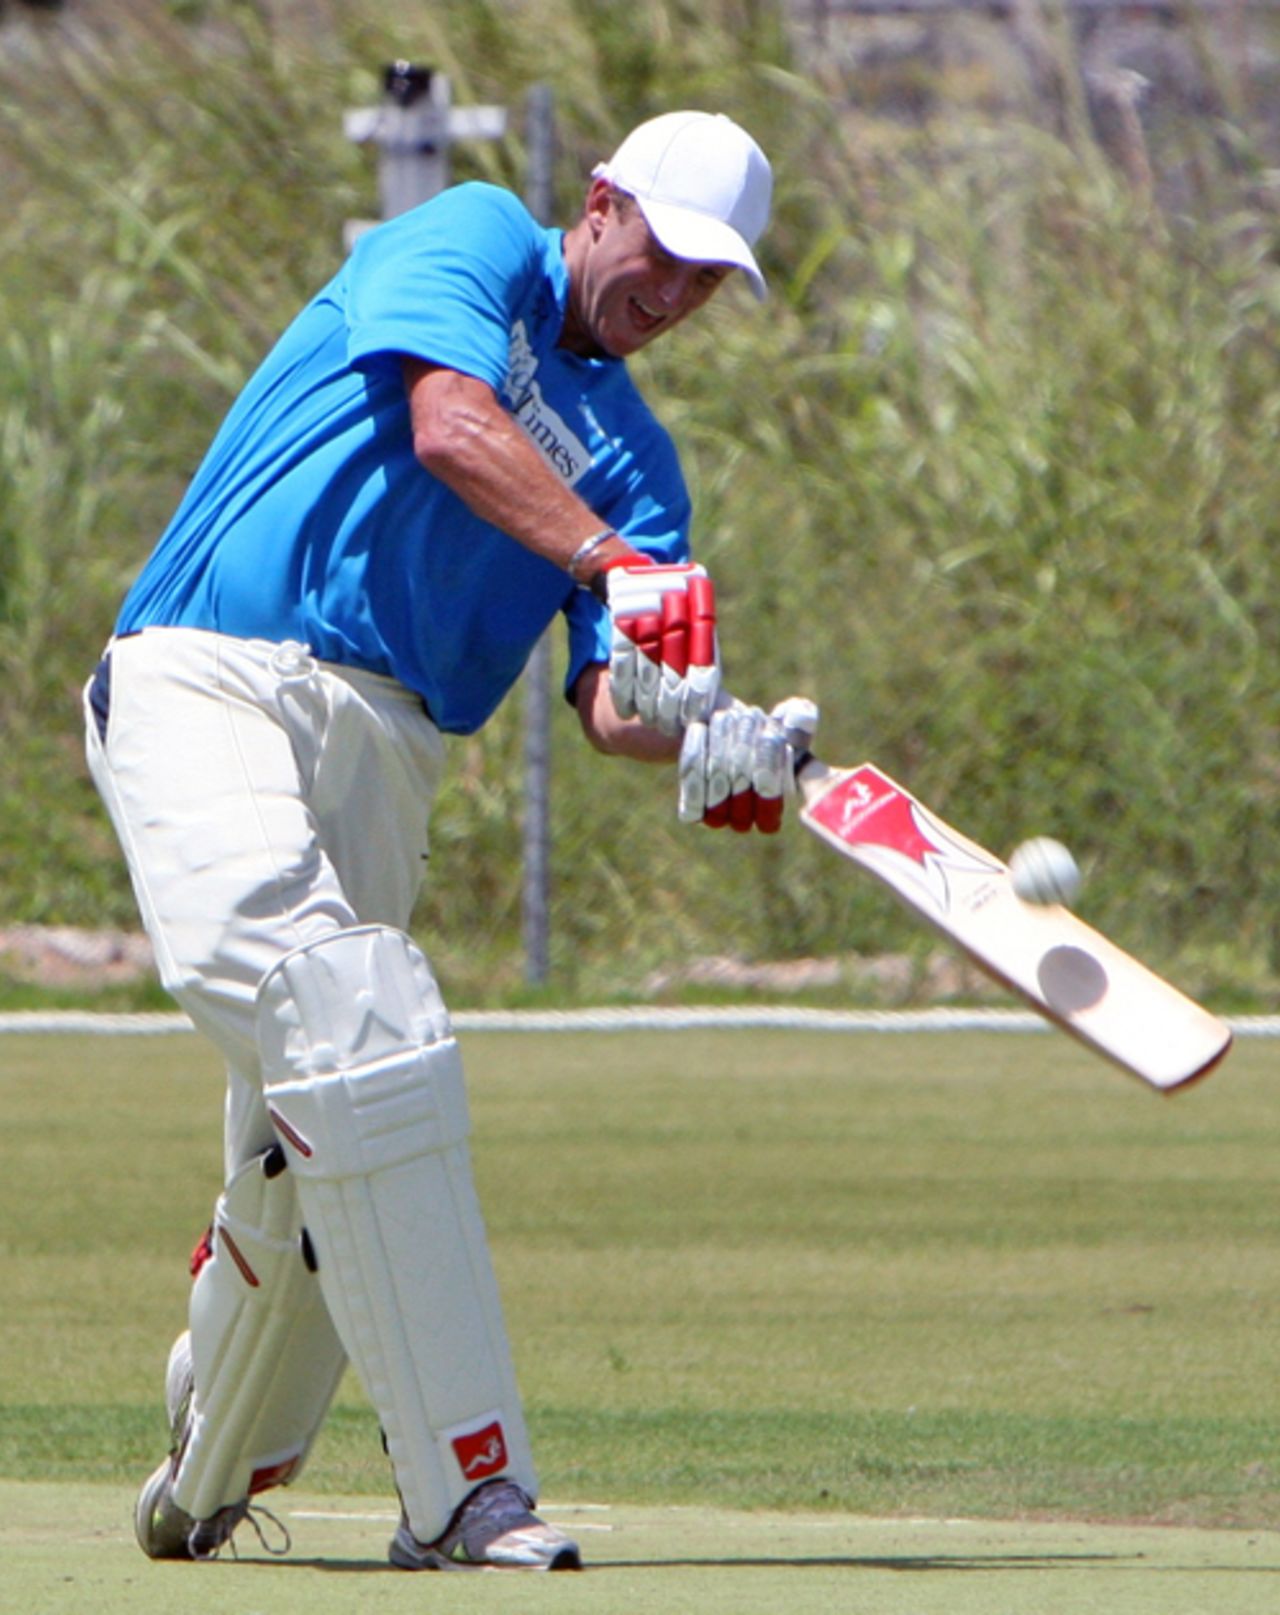 Peter Wooden scored 89* for Stormers but his team came up 22 runs short of their target in the second round of the 2010 Elite Player Series at Kai Tak Cricket Ground on 25th July 2010 